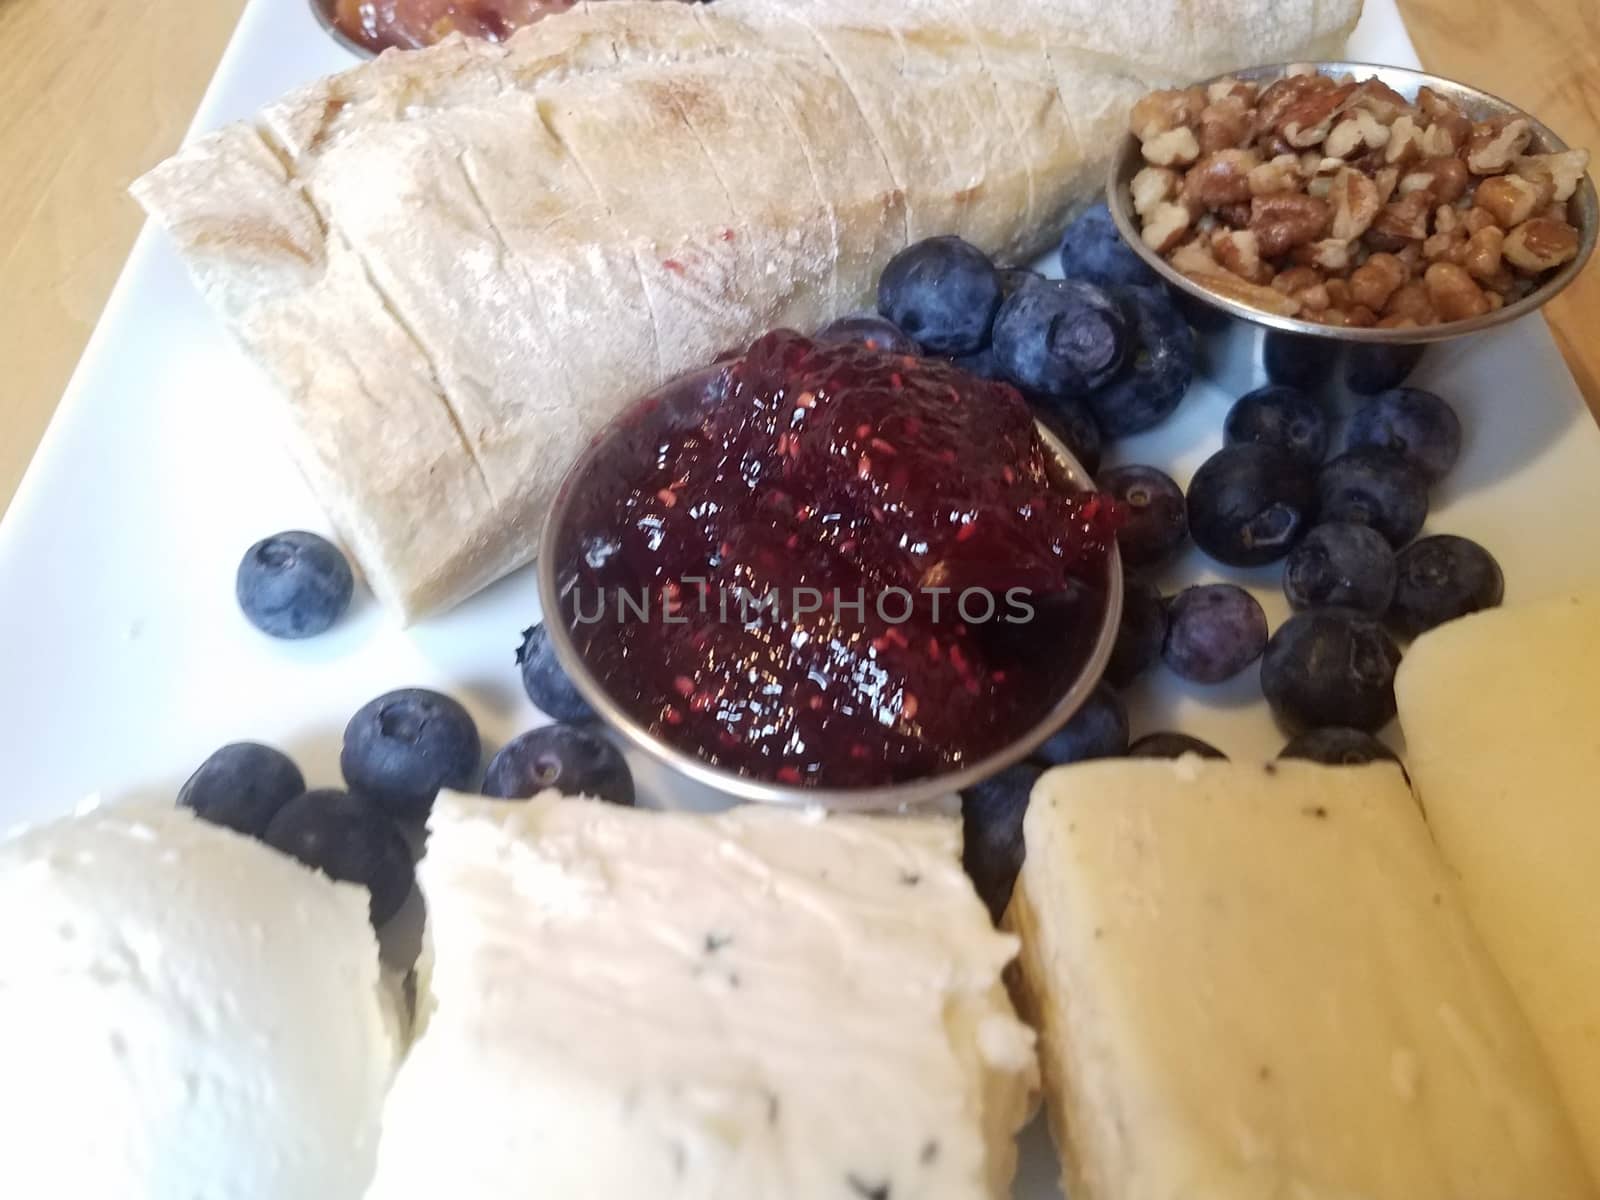 cheese and pecans and bread and blueberries on white plate by stockphotofan1